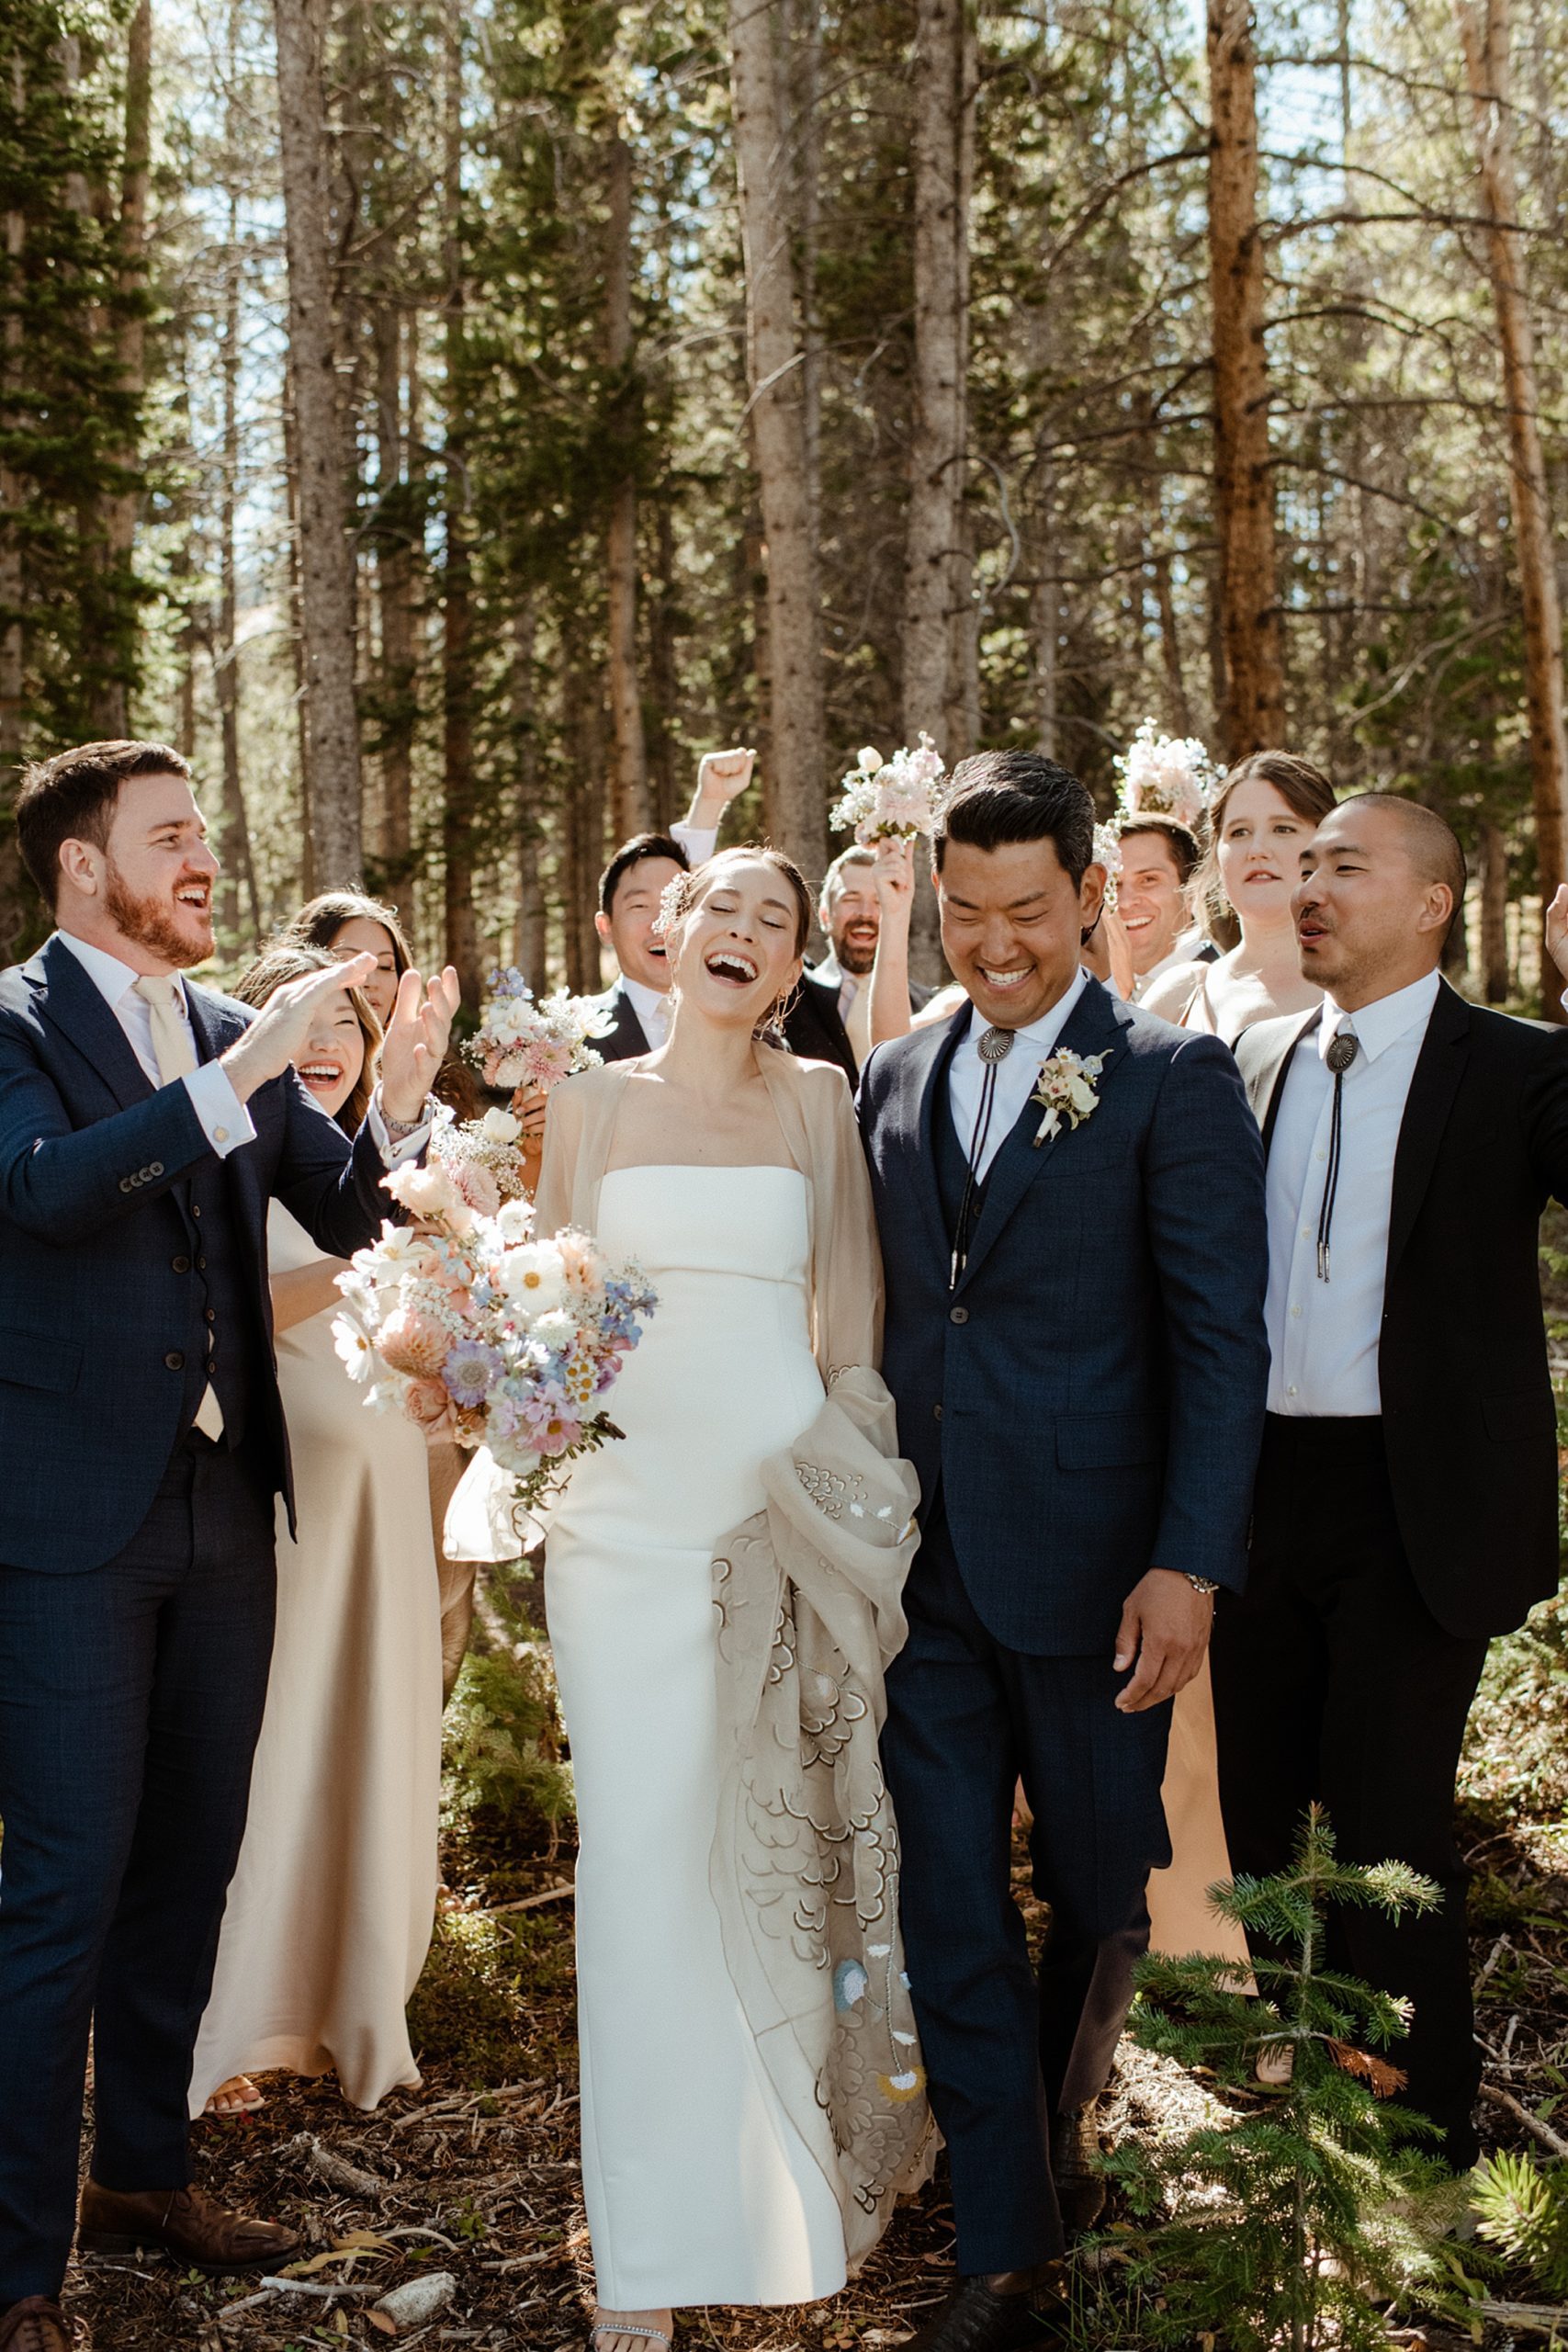 A bride and groom and their wedding party in the woods at Ten Mile Station wedding venue